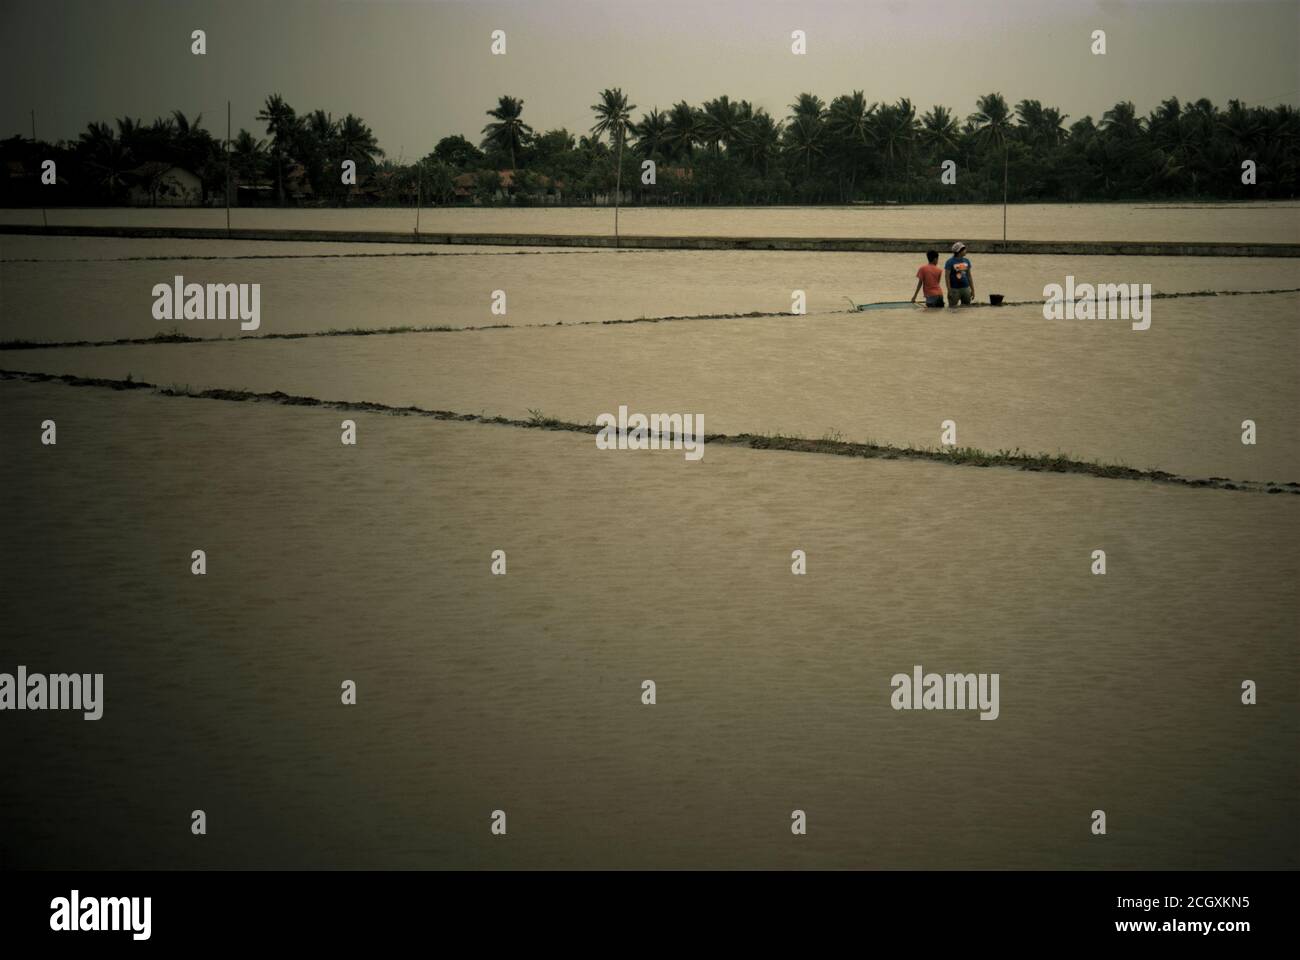 Young people standing on a flooded rice field to fish with a pushnet, as torrential rains during rainy season have left some agricultural fields flooded in Karawang regency, West Java province, Indonesia. Stock Photo